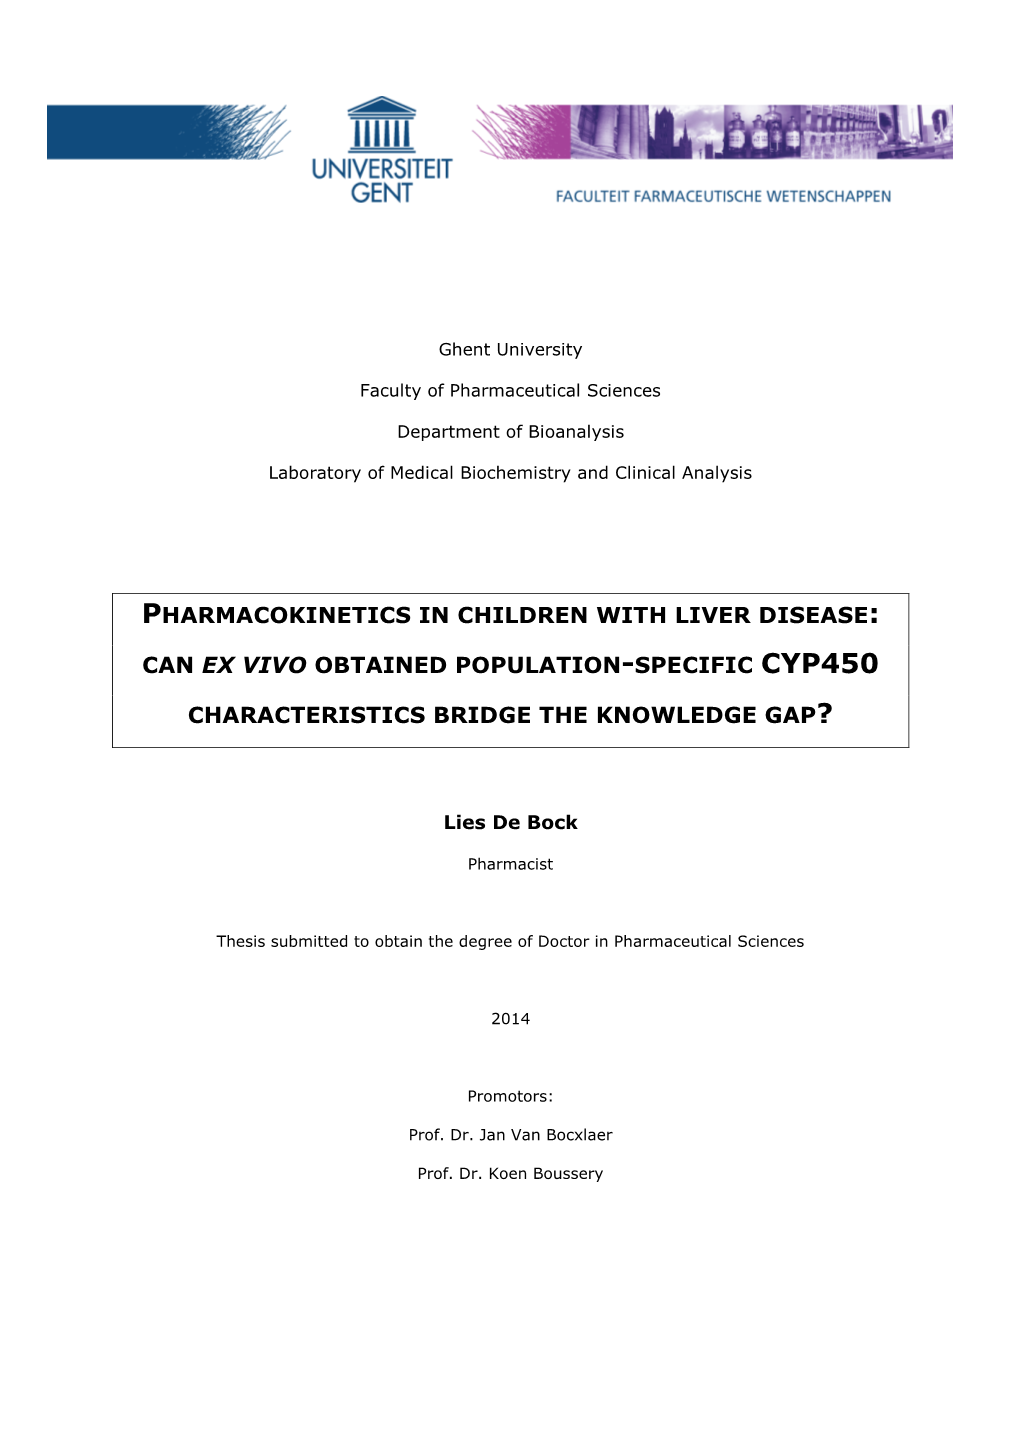 Pharmacokinetics in Children with Liver Disease